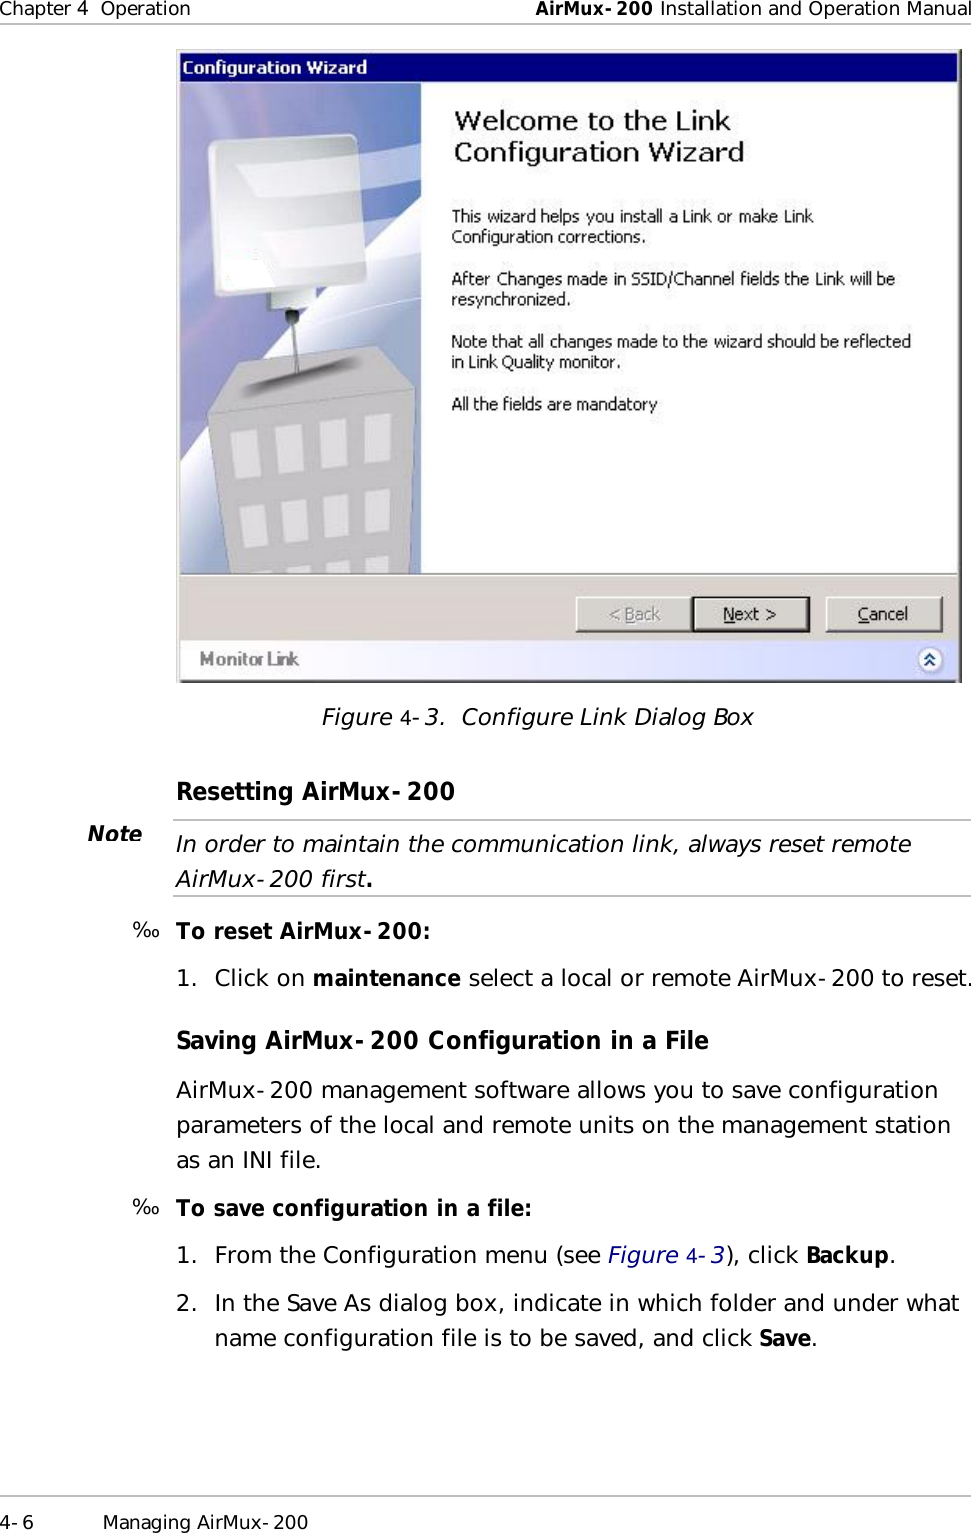 Chapter   4  Operation  AirMux-200 Installation and Operation Manual 4-6 Managing AirMux-200   Figure   4-3.  Configure Link Dialog Box Resetting AirMux-200  In order to maintain the communication link, always reset remote AirMux-200 first.  ä  To reset AirMux-200: 1. Click on maintenance select a local or remote AirMux-200 to reset. Saving AirMux-200 Configuration in a File AirMux-200 management software allows you to save configuration parameters of the local and remote units on the management station as an INI file. ä  To save configuration in a file: 1. From the Configuration menu (see Figure   4-3), click Backup. 2. In the Save As dialog box, indicate in which folder and under what name configuration file is to be saved, and click Save. Note 